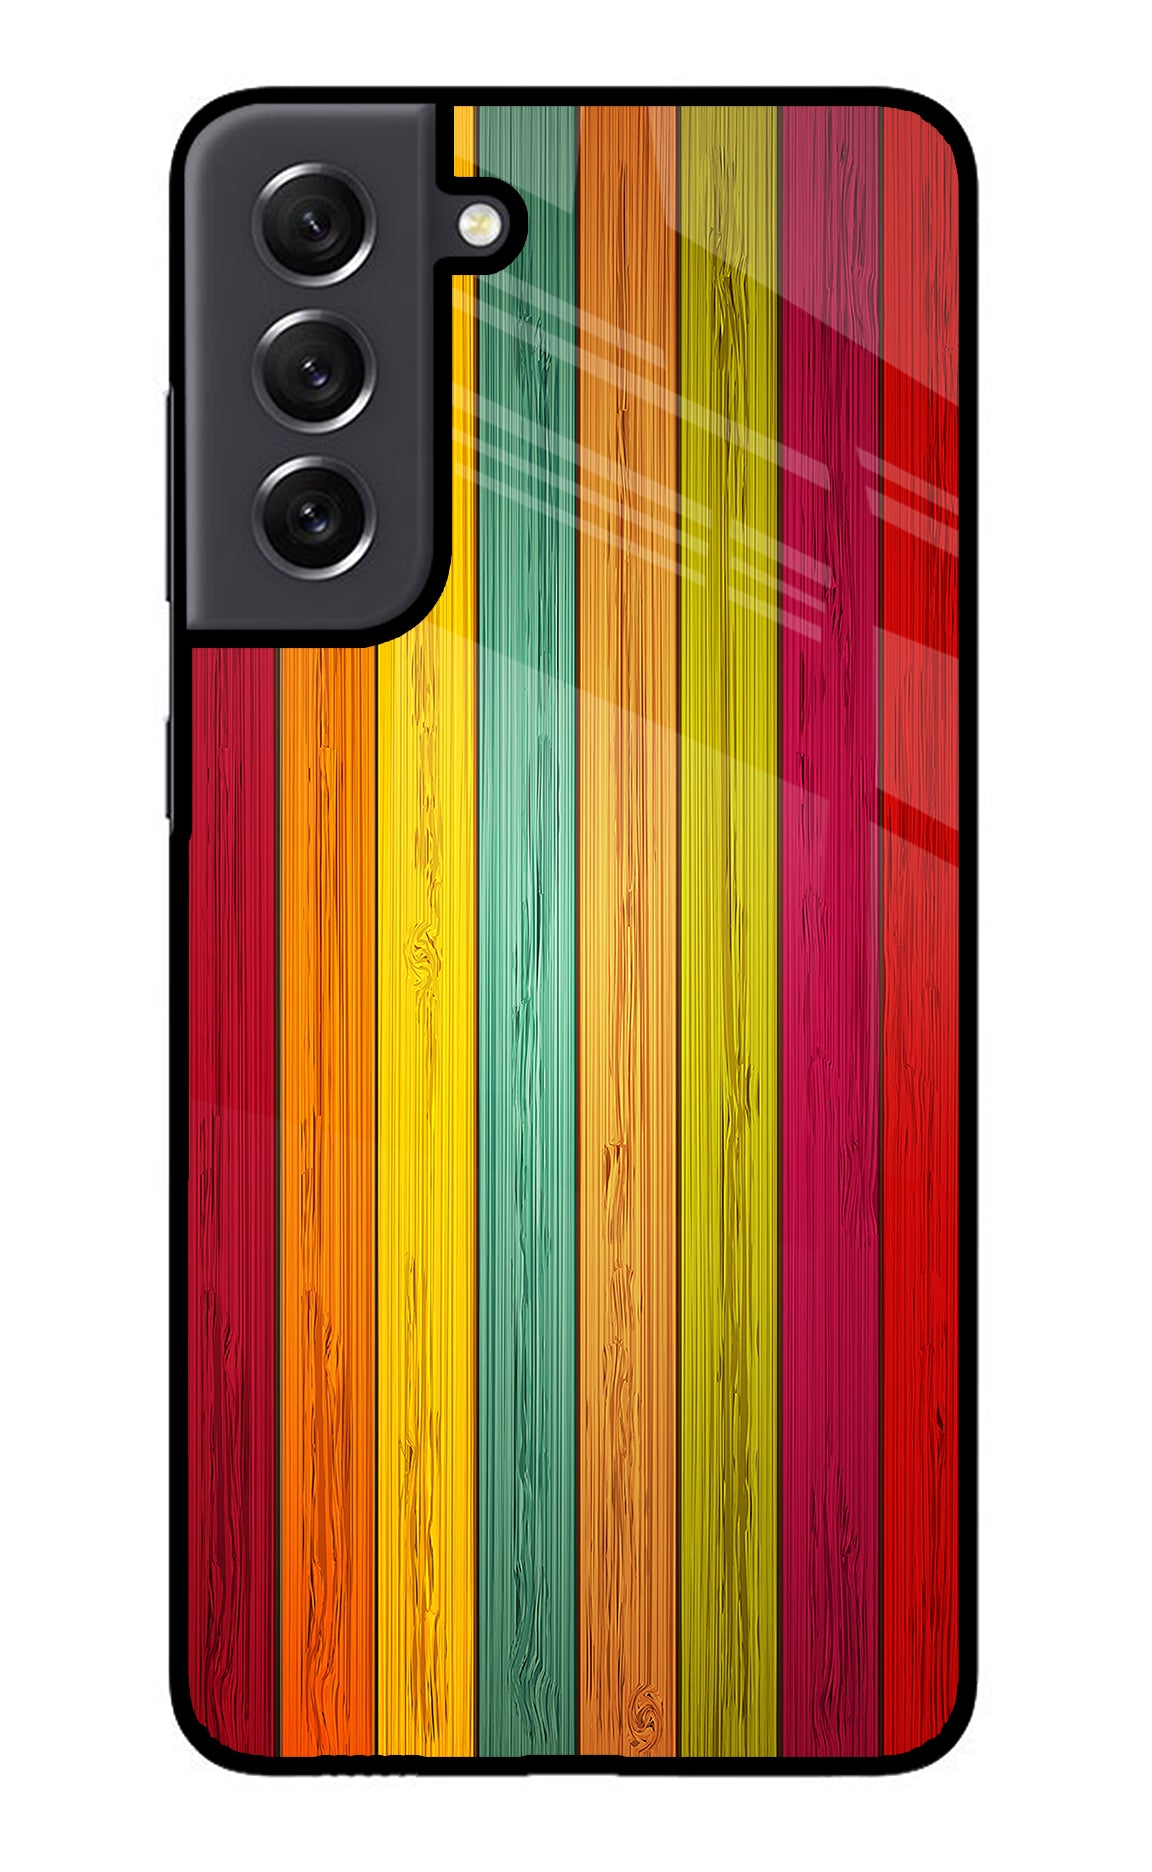 Multicolor Wooden Samsung S21 FE 5G Back Cover